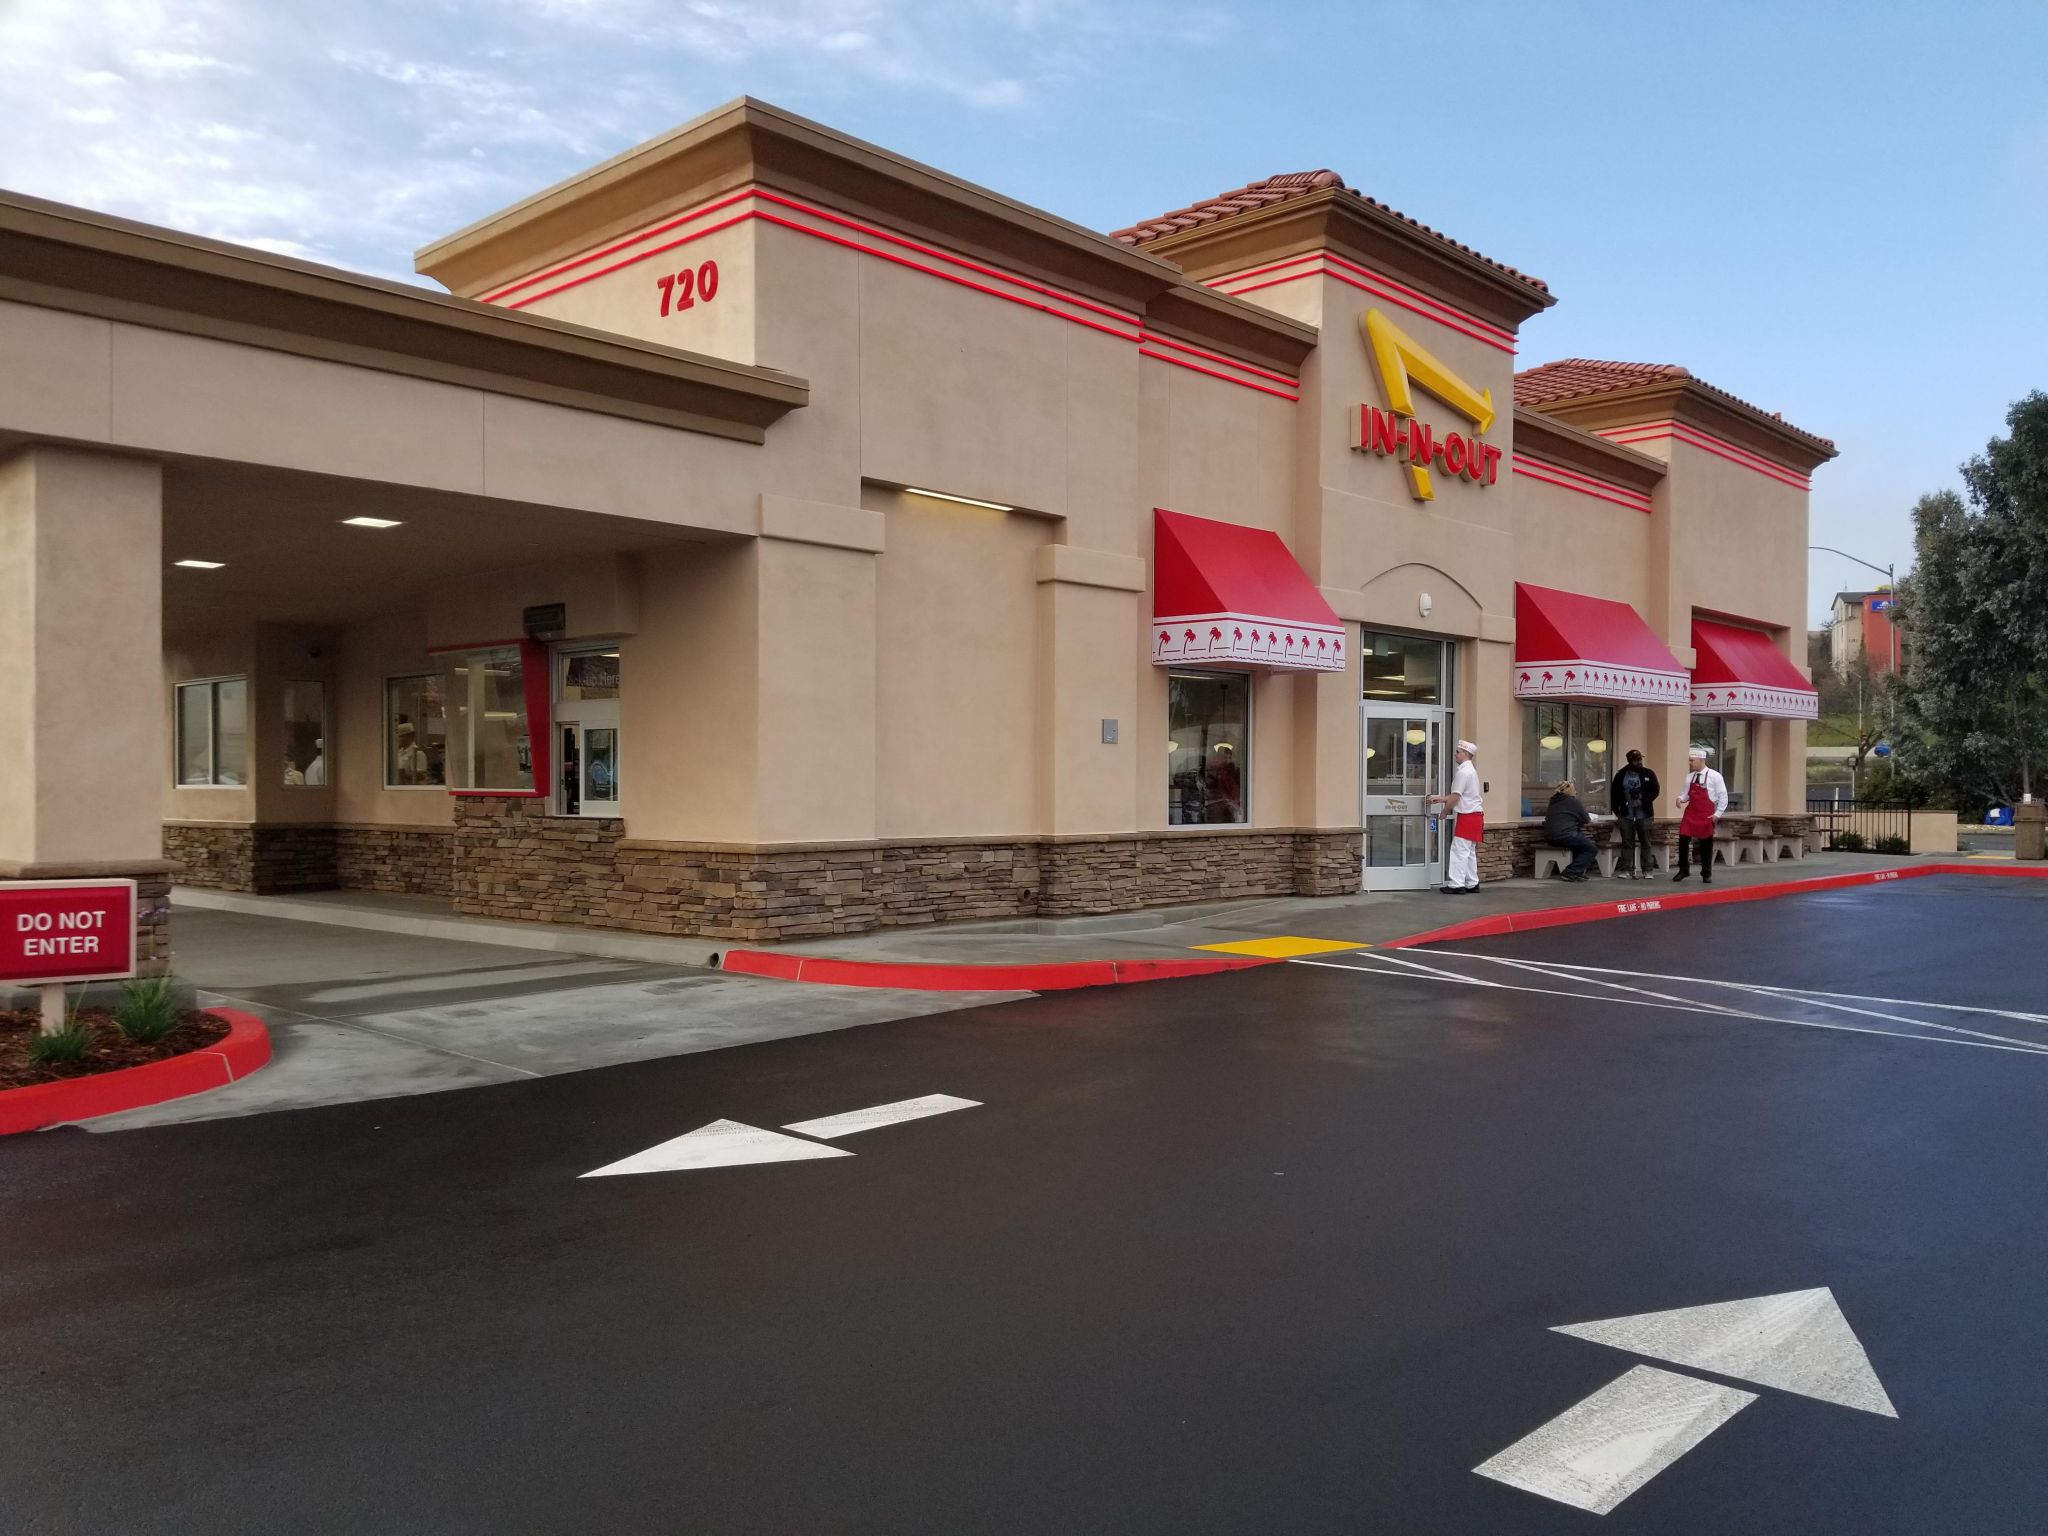 Bay Area's newest InNOut location is now open in Vallejo